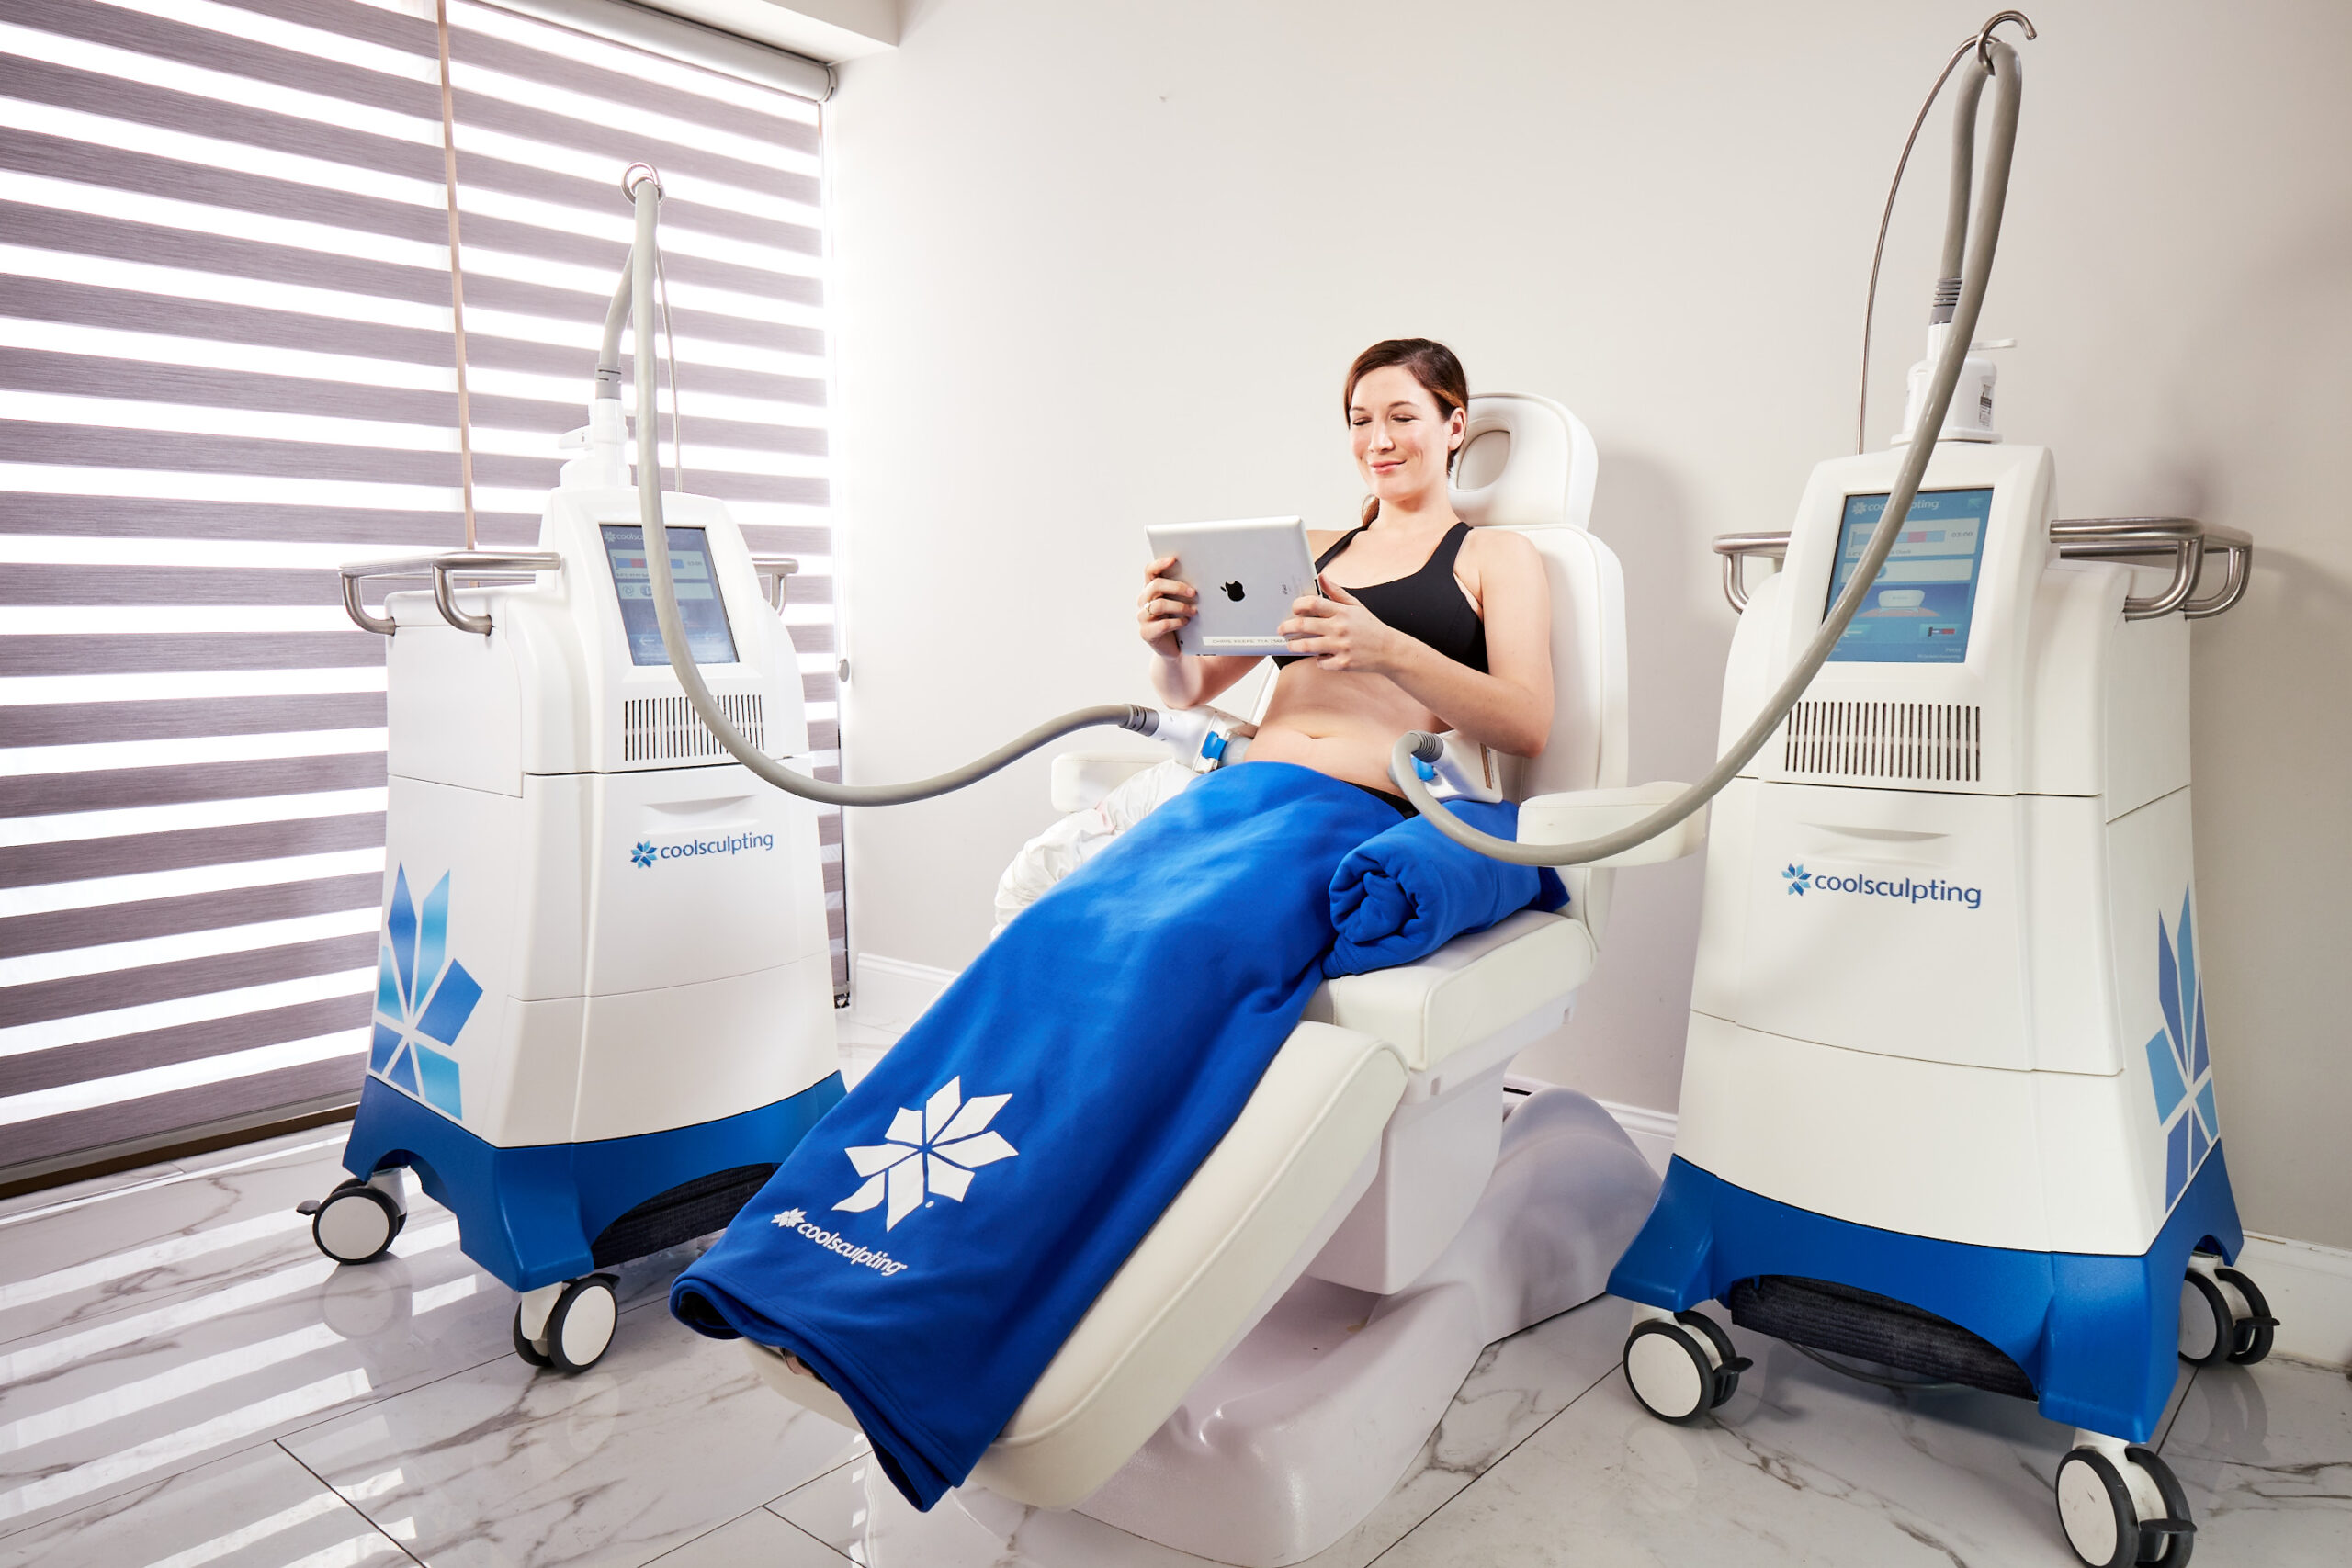 How Effective is Non-Invasive Fat Removal? Learn All About CoolSculpting®